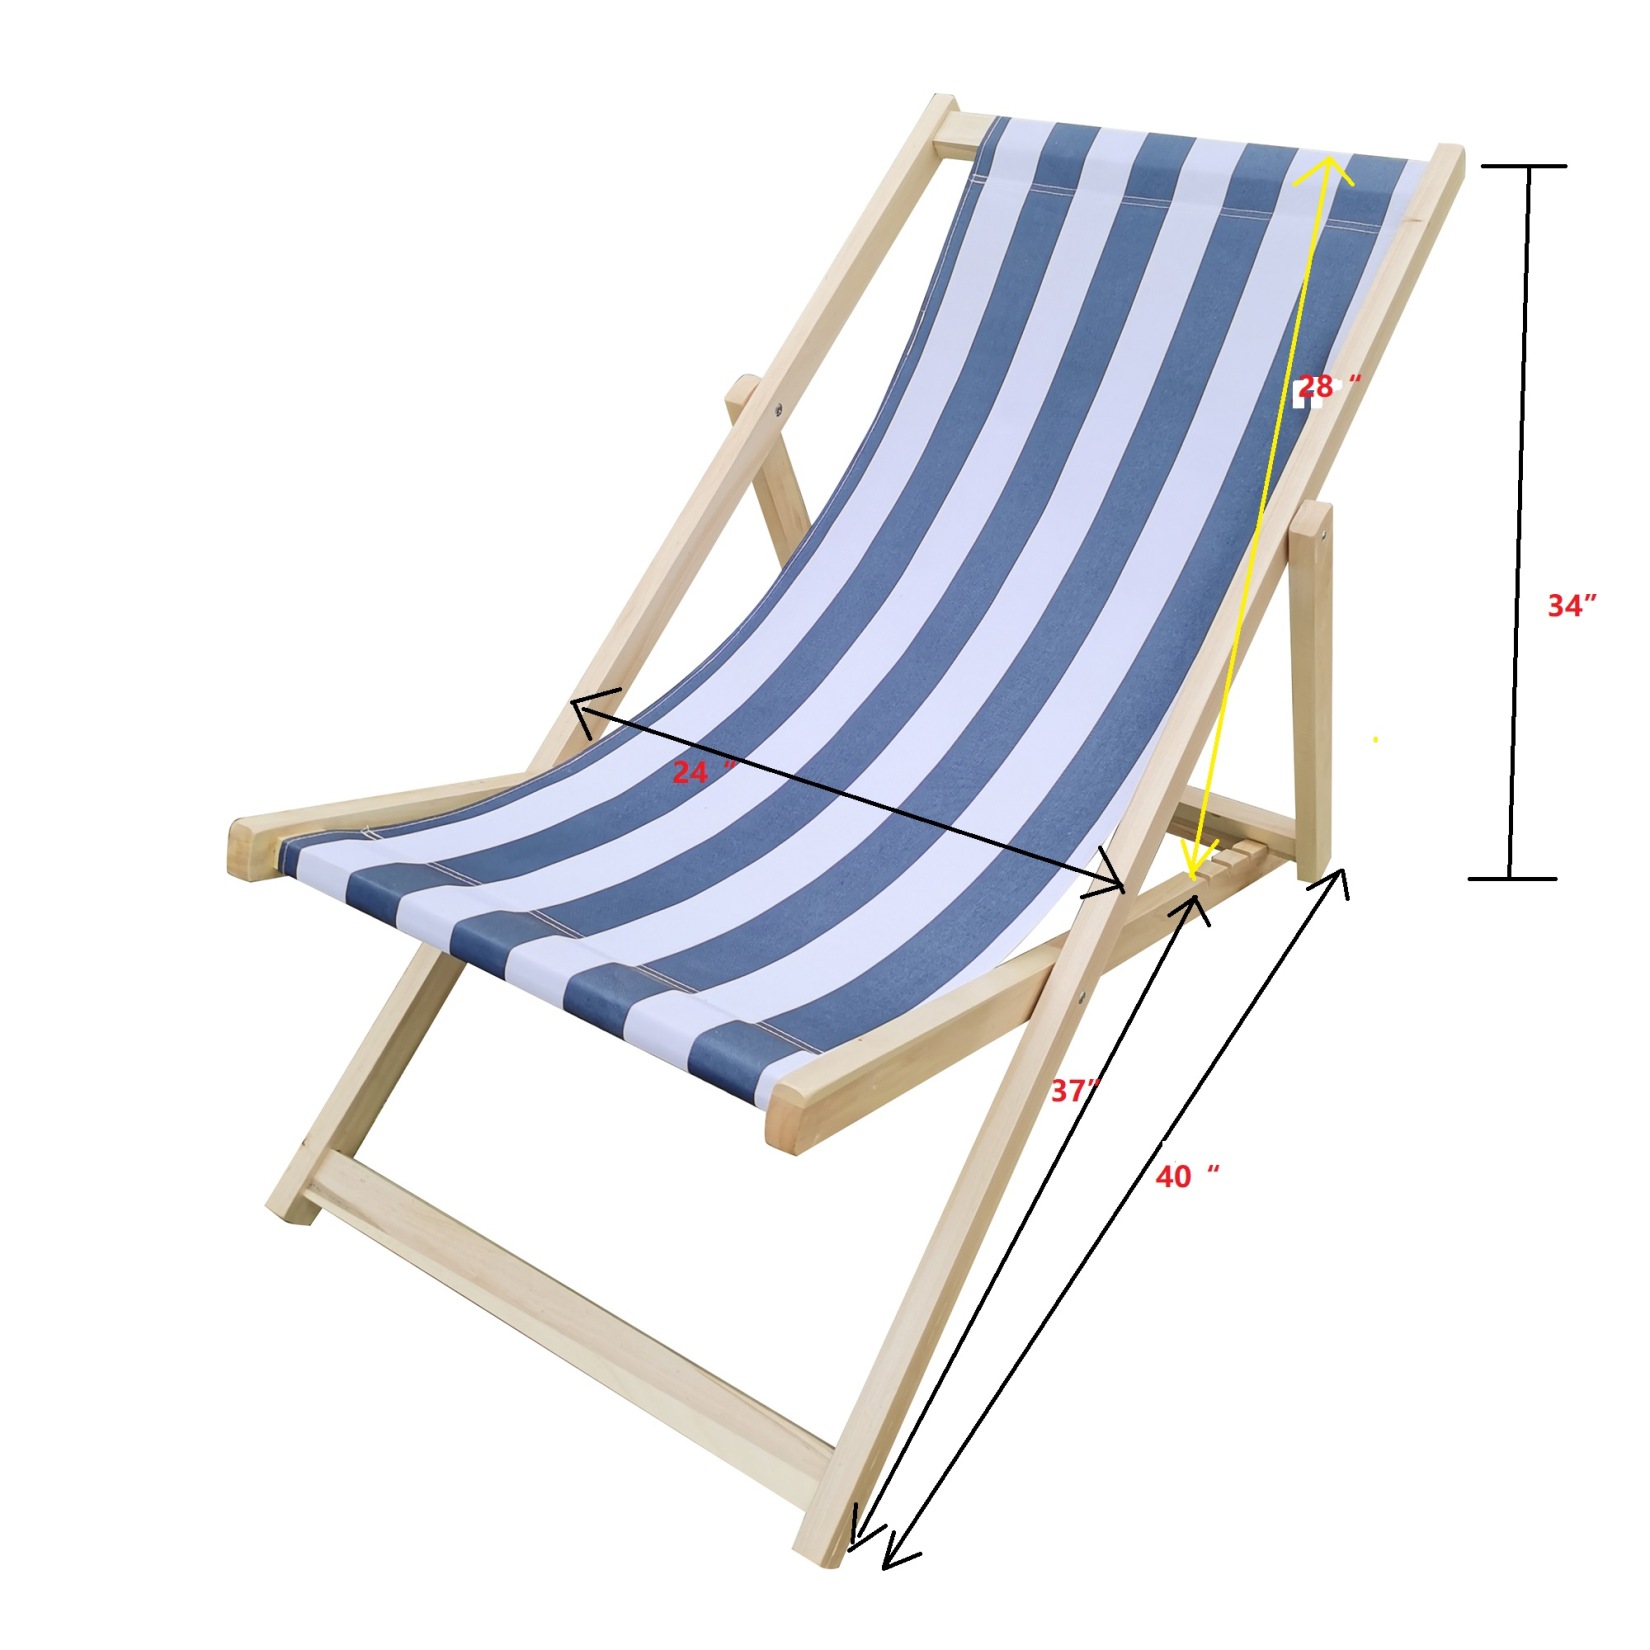 Outdoor Folding Beach Chaise Lounge Chair Camping Recliner, Sling Chair Beach Recliner, Beach Chair with Adjustable Back, Pool Chair Outdoor Chair Garden Chair, Portable Chair - image 1 of 8